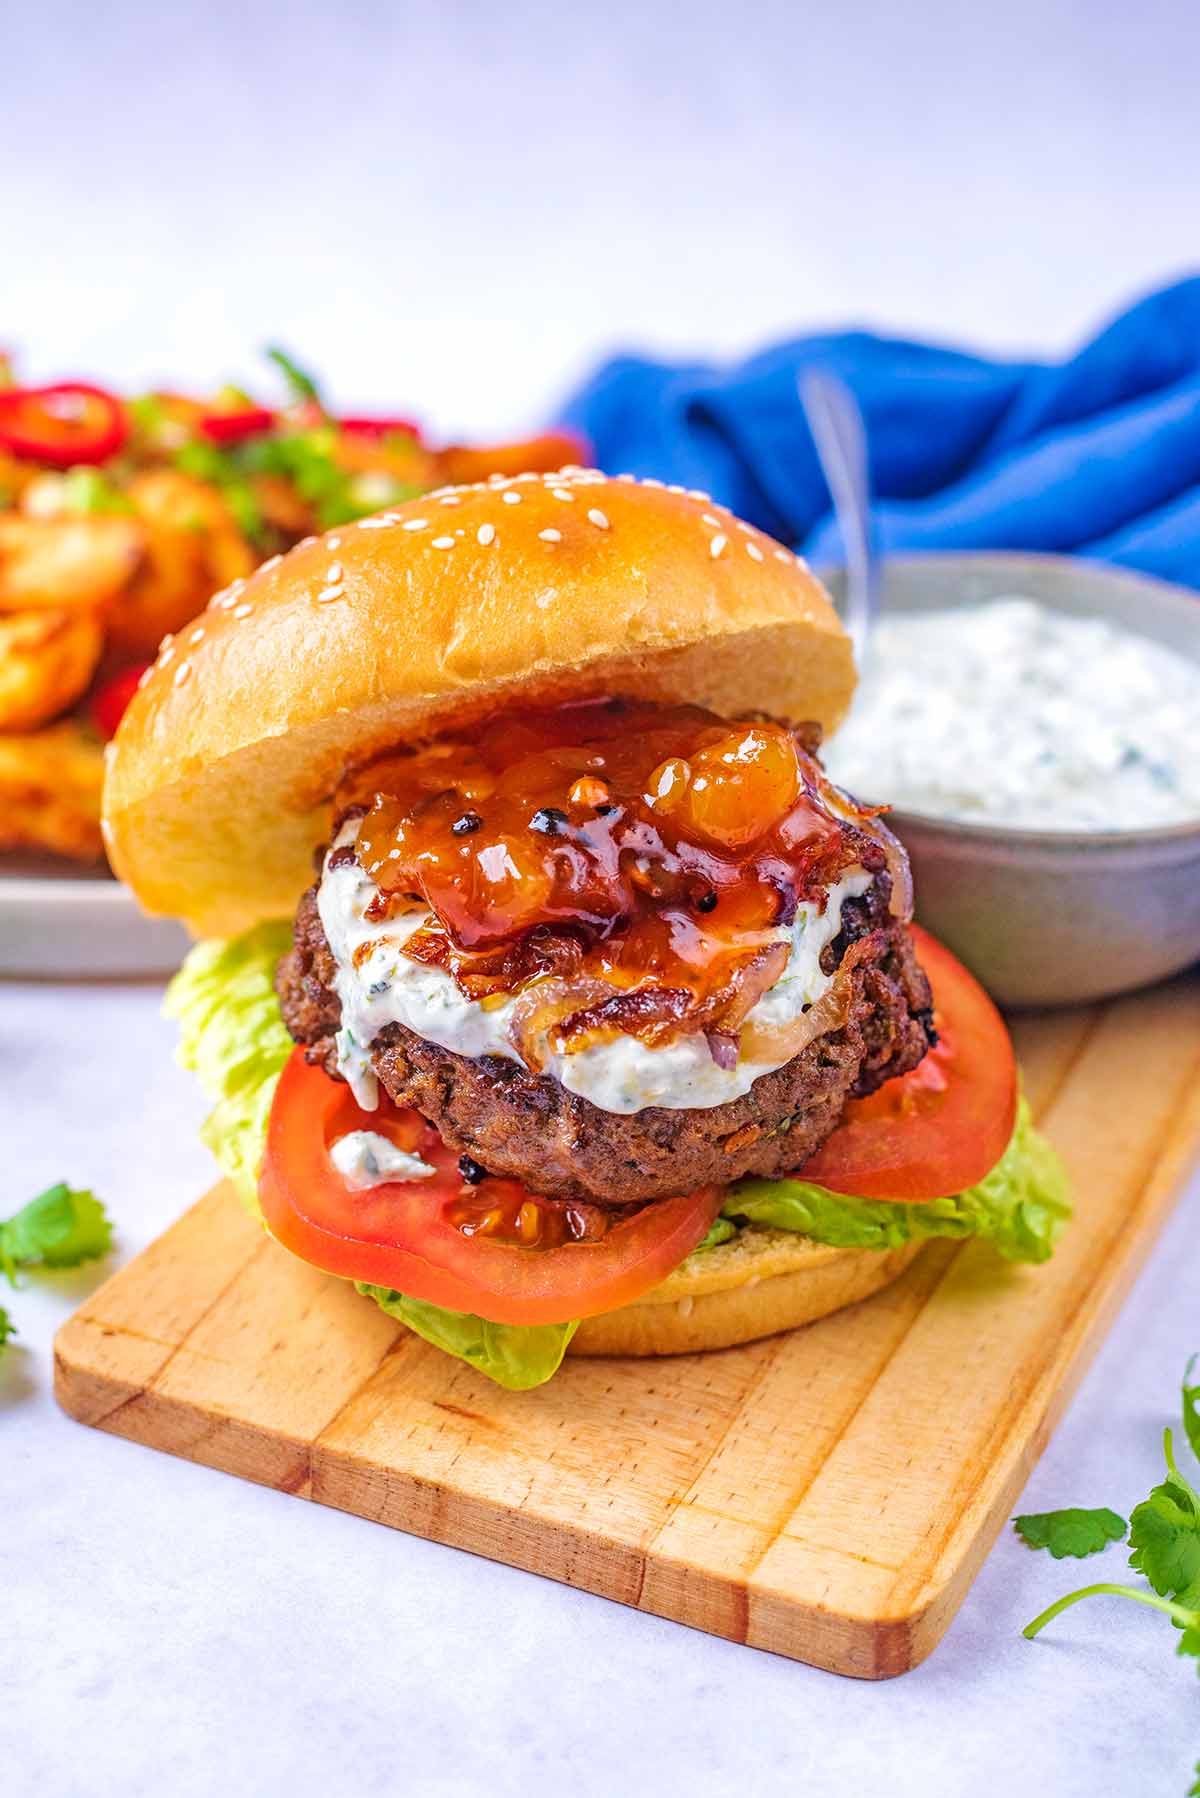 A stacked burger on a wooden board in front of a bowl of creamy sauce.